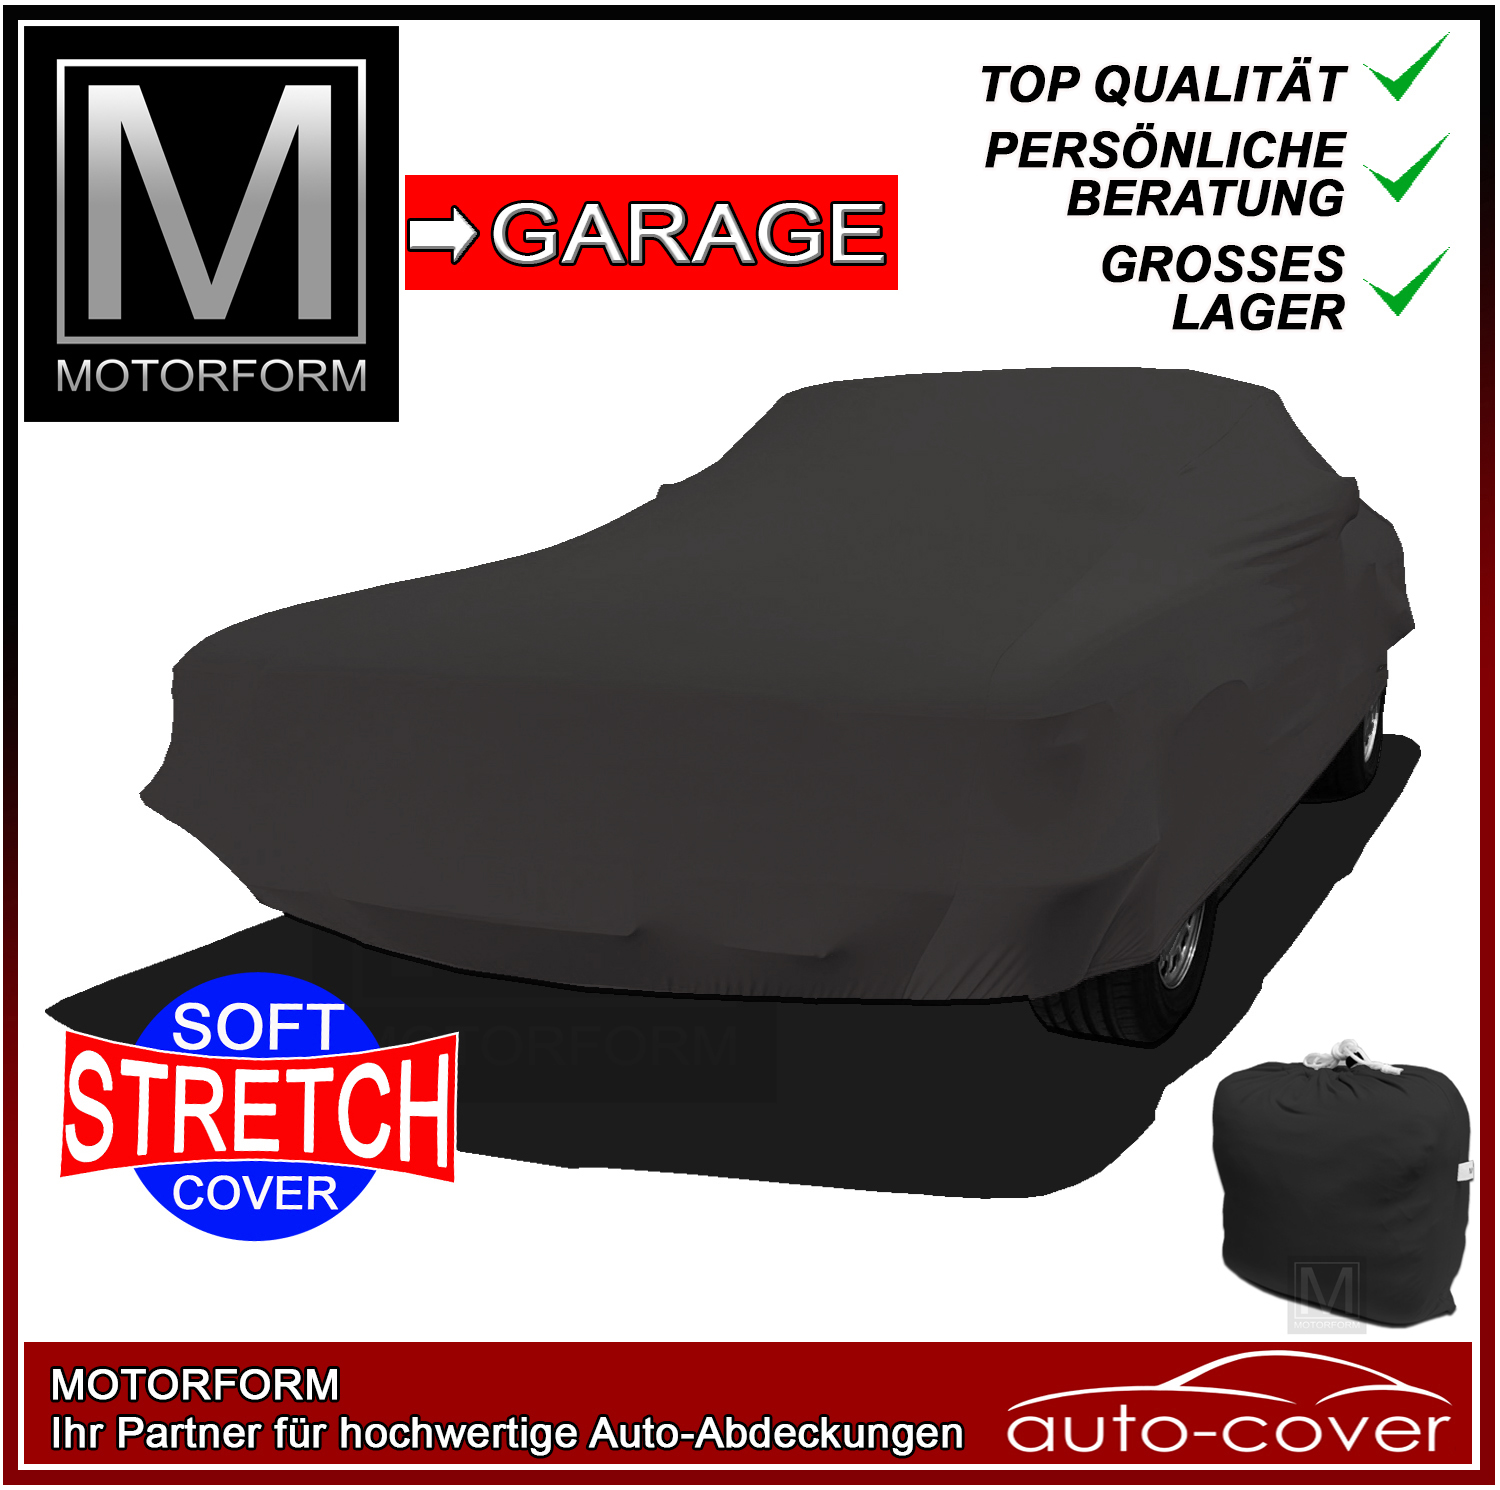 Super Stretchy Cover for Bentley Continental GT GT (2011-18)